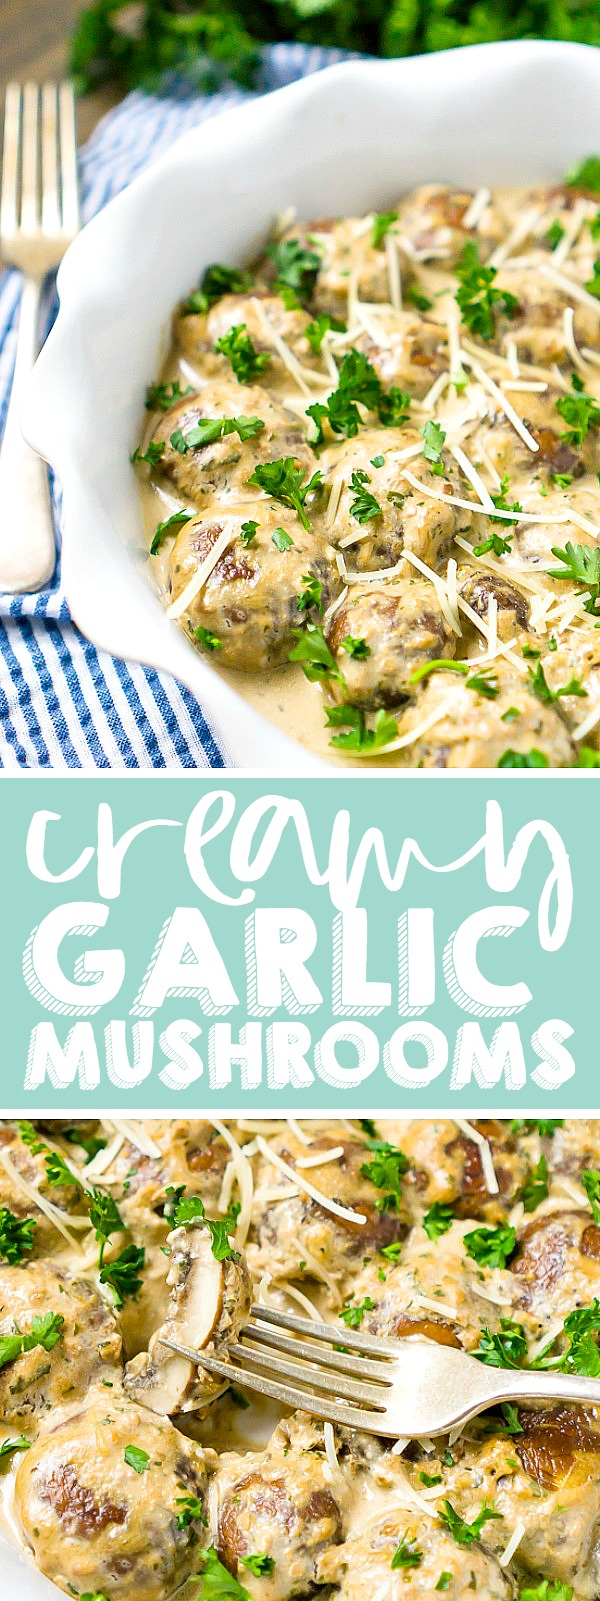 Add a mushroom side dish to your Thanksgiving and Christmas table this year! These easy Creamy Garlic Mushrooms are rich, flavorful and require only one pan, making it a perfect holiday side dish recipe.  | THE LOVE NERDS #christmassidedish #thanksgivingsidedish #holidaysides